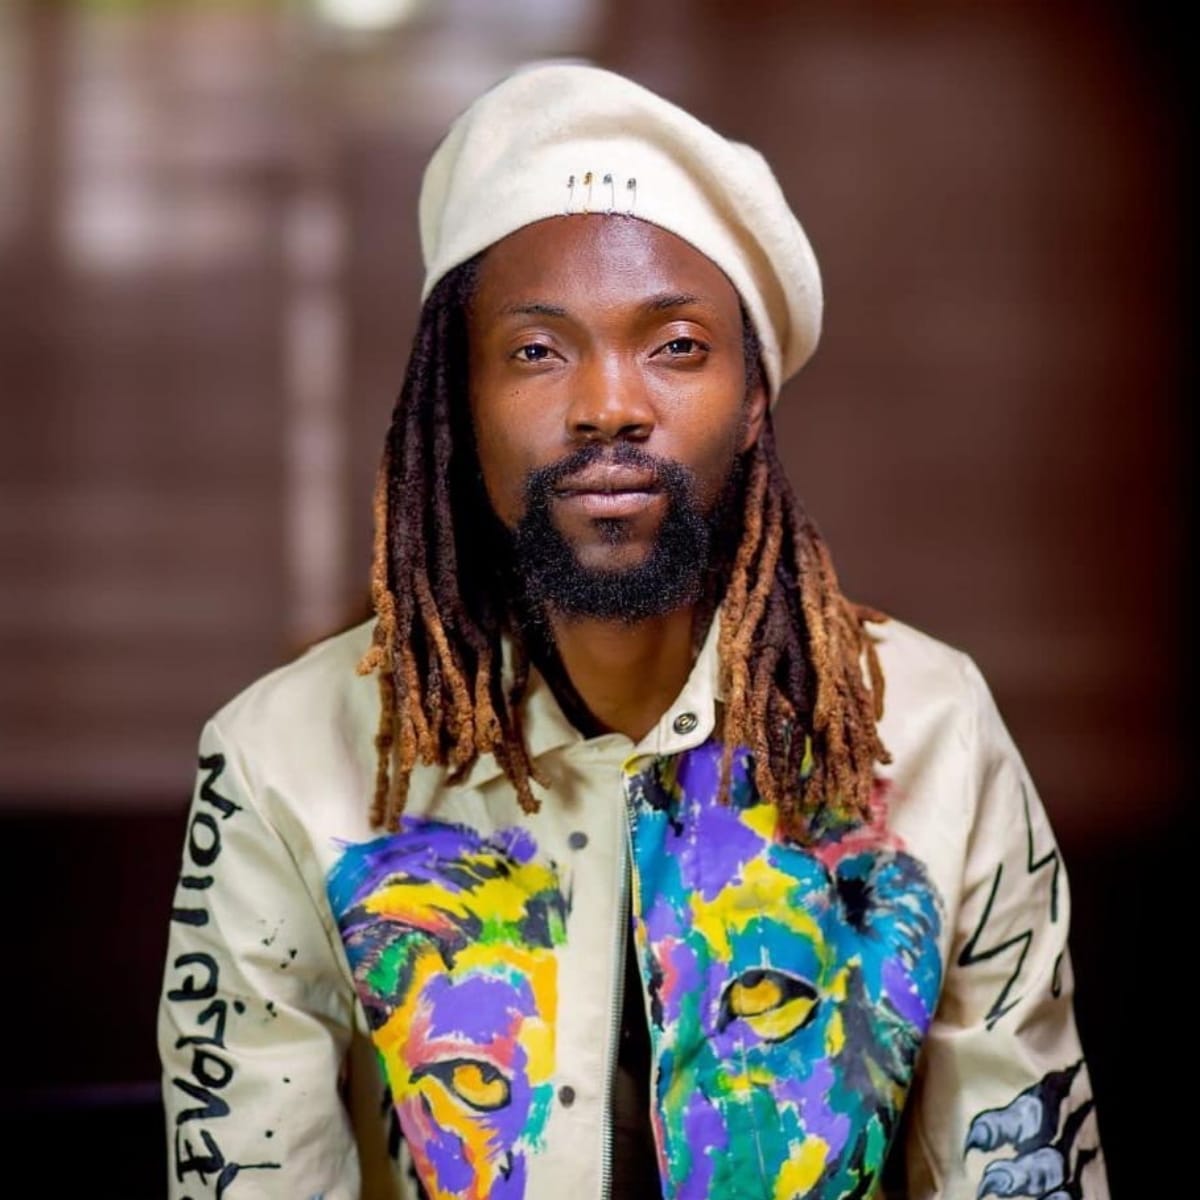 DOWNLOAD: Jay Rox – “Get Lost” Mp3